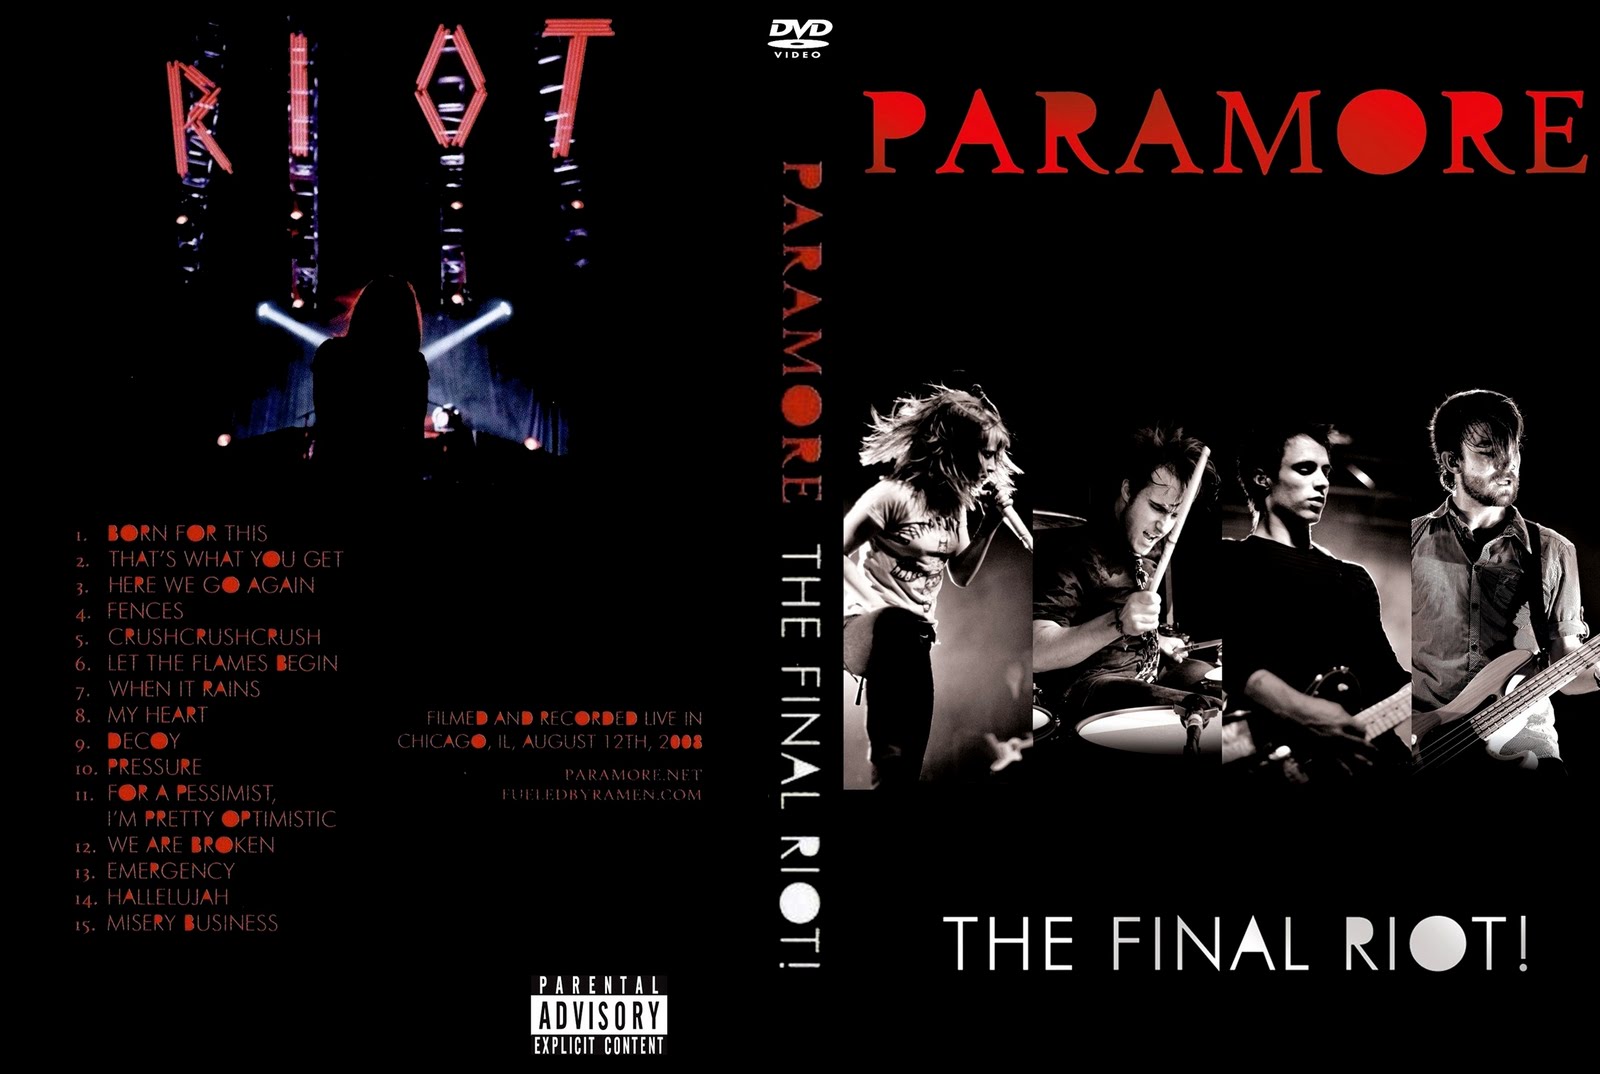 The final слушать. Paramore "Riot! (CD)". Empyr the peaceful Riot (2008). Final текст. Final selection - Red line (CDS) (2008).